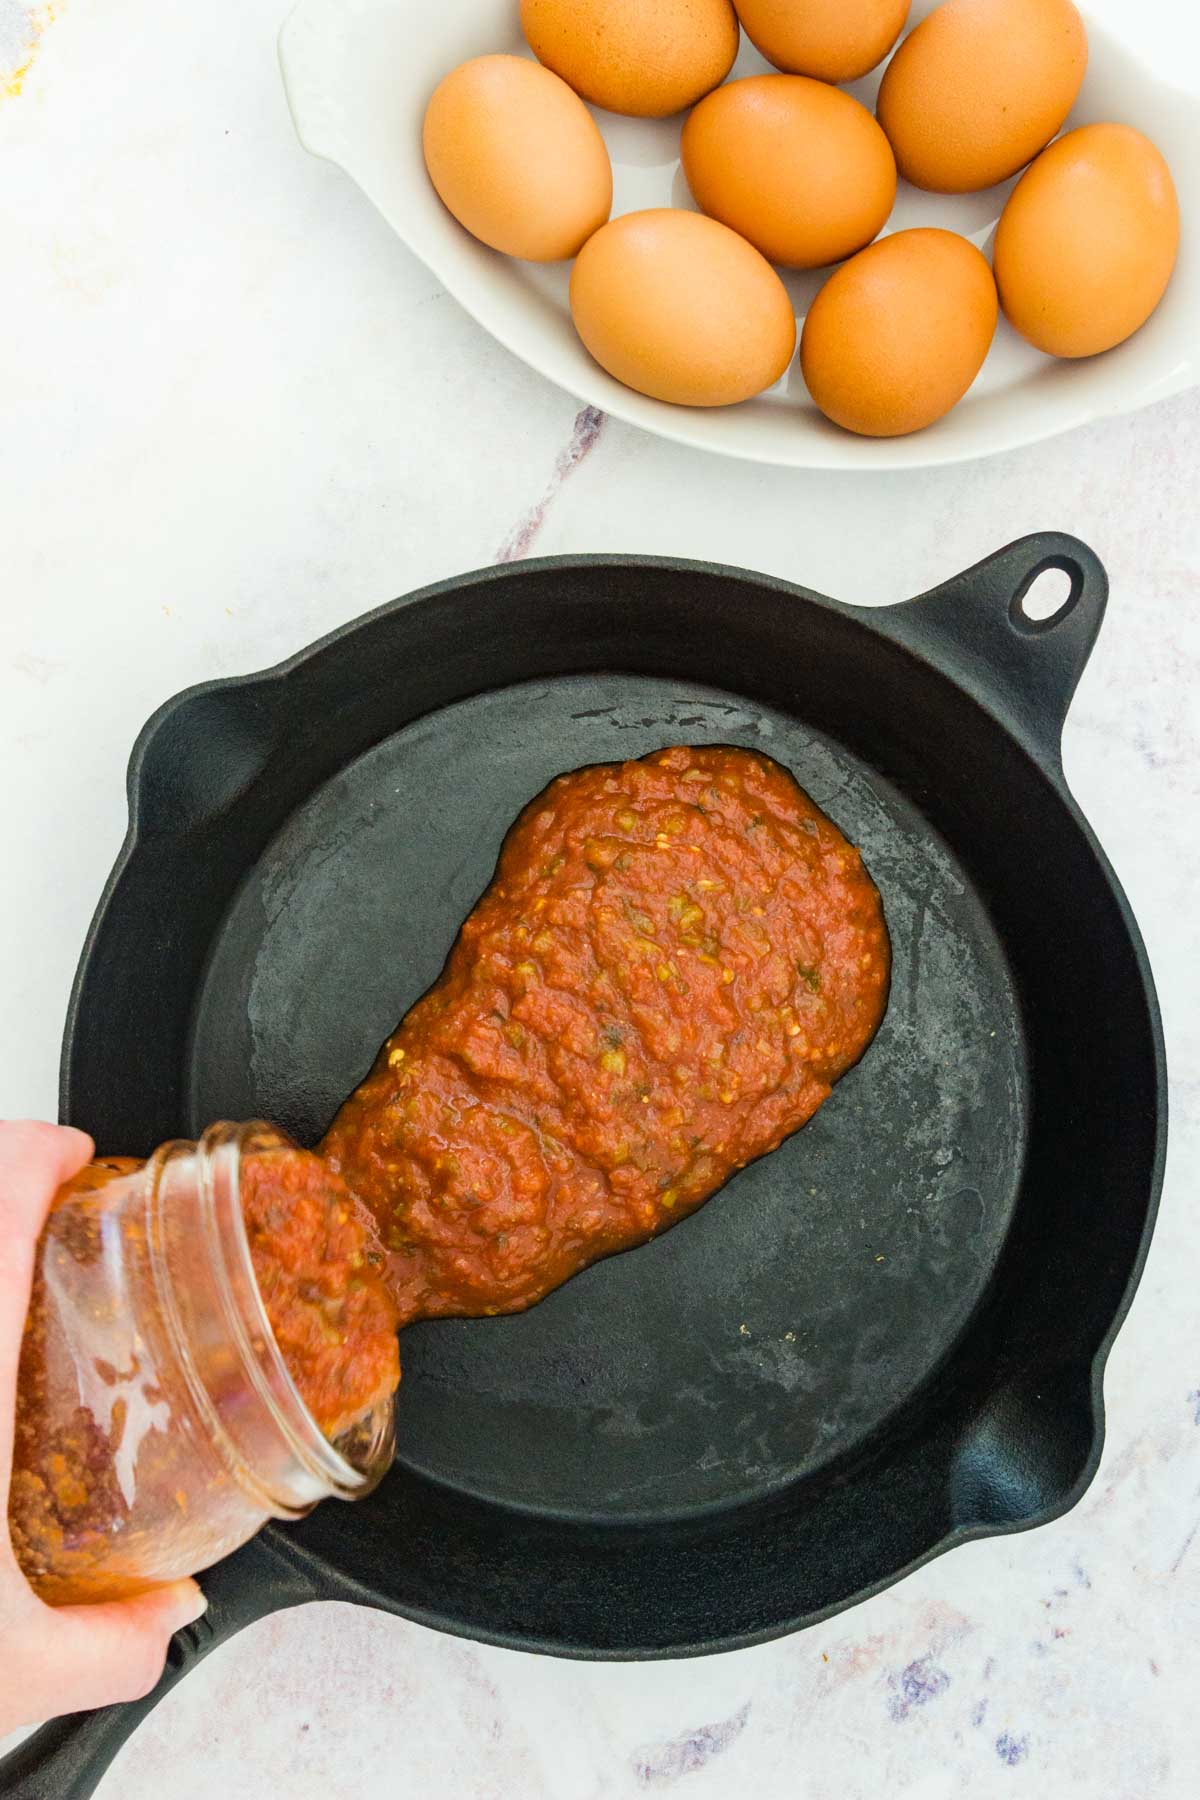 Salsa being poured into a cast iron skillet beside a bowl full of whole raw eggs.